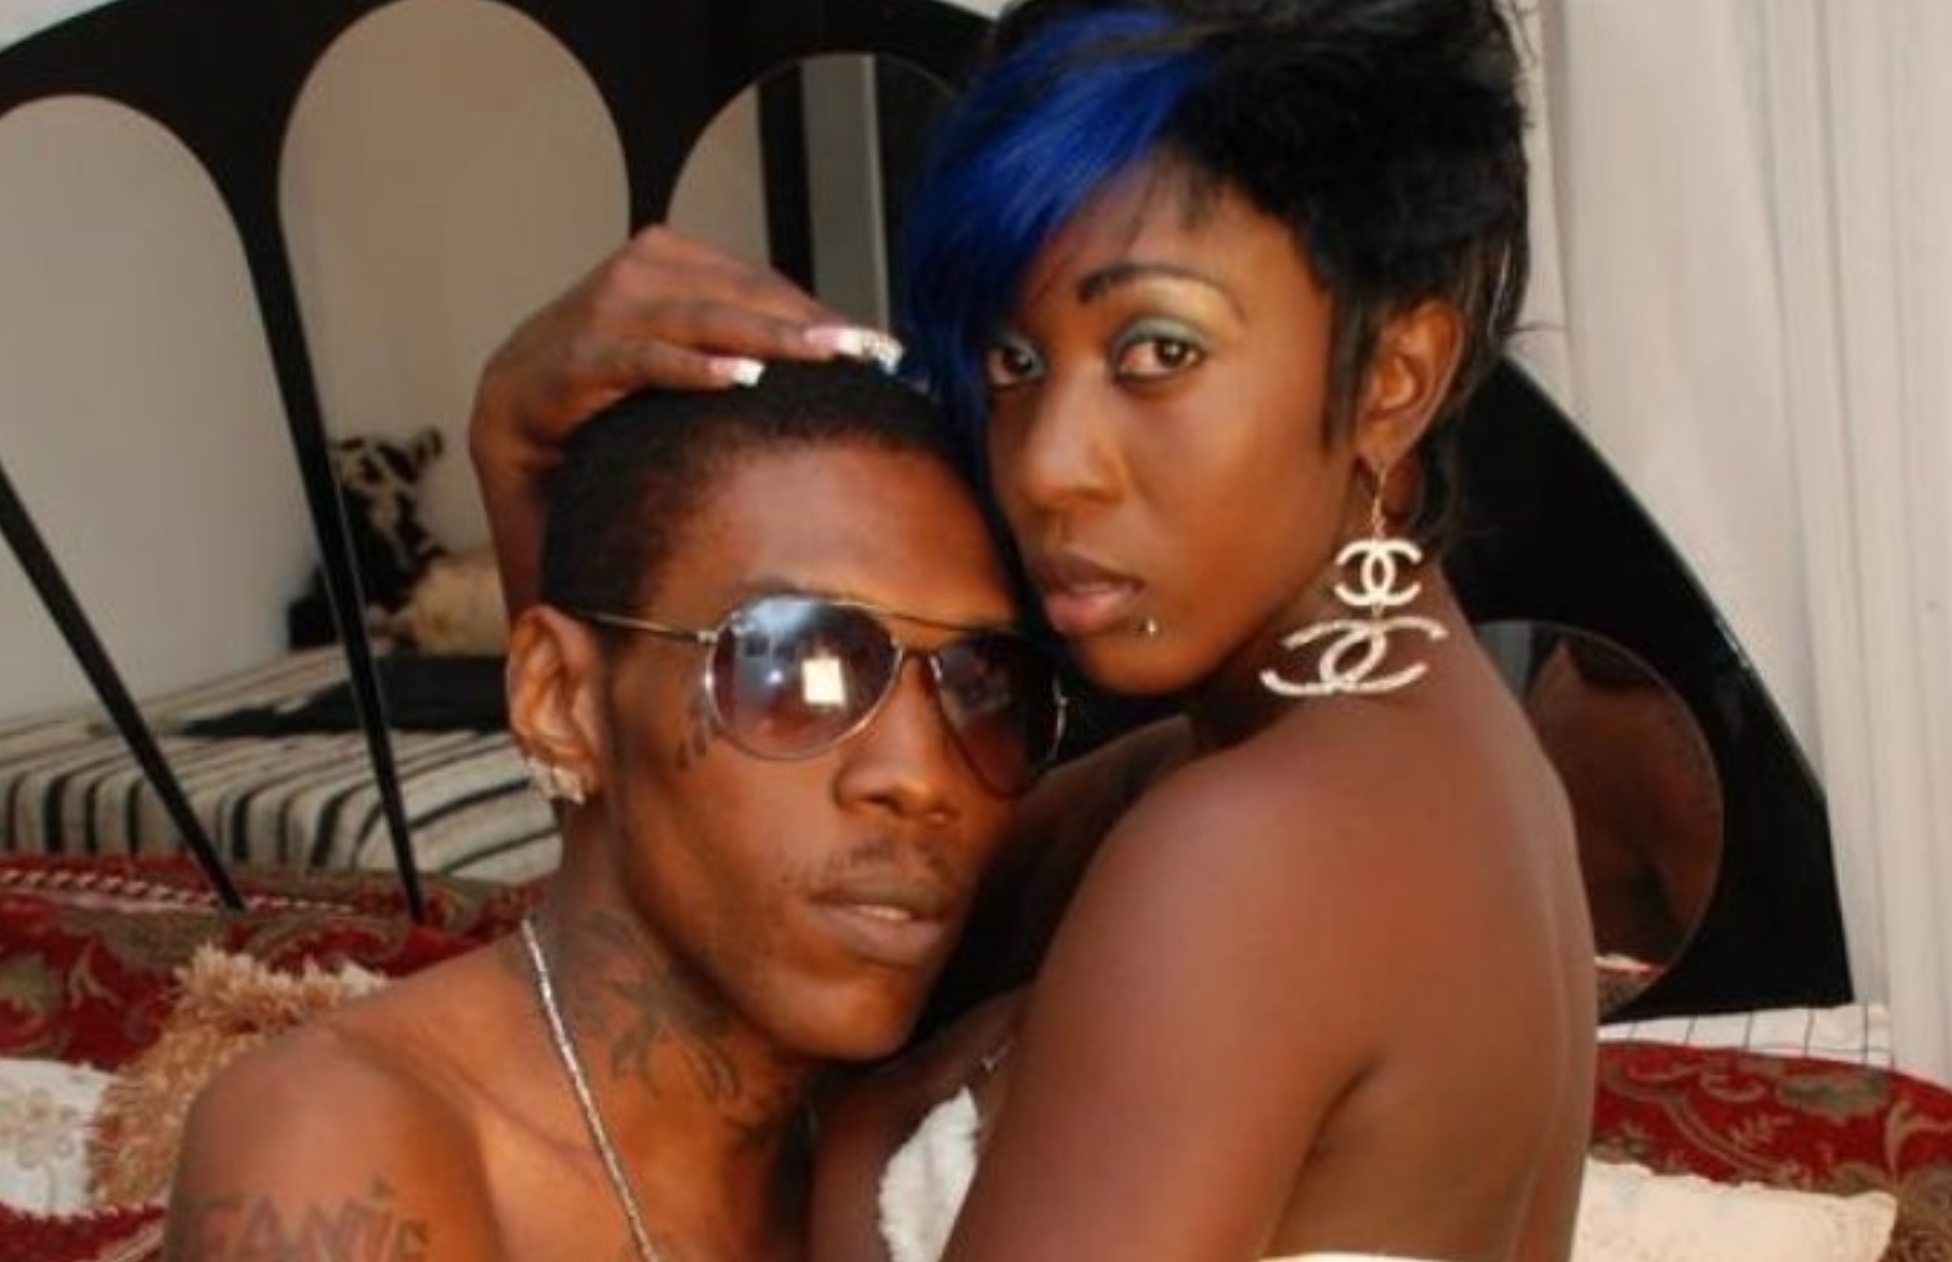 Vybz Kartel's High Profile Unreleased Collaborations Leaked Featuring Spice and Squash - Listen to Audios